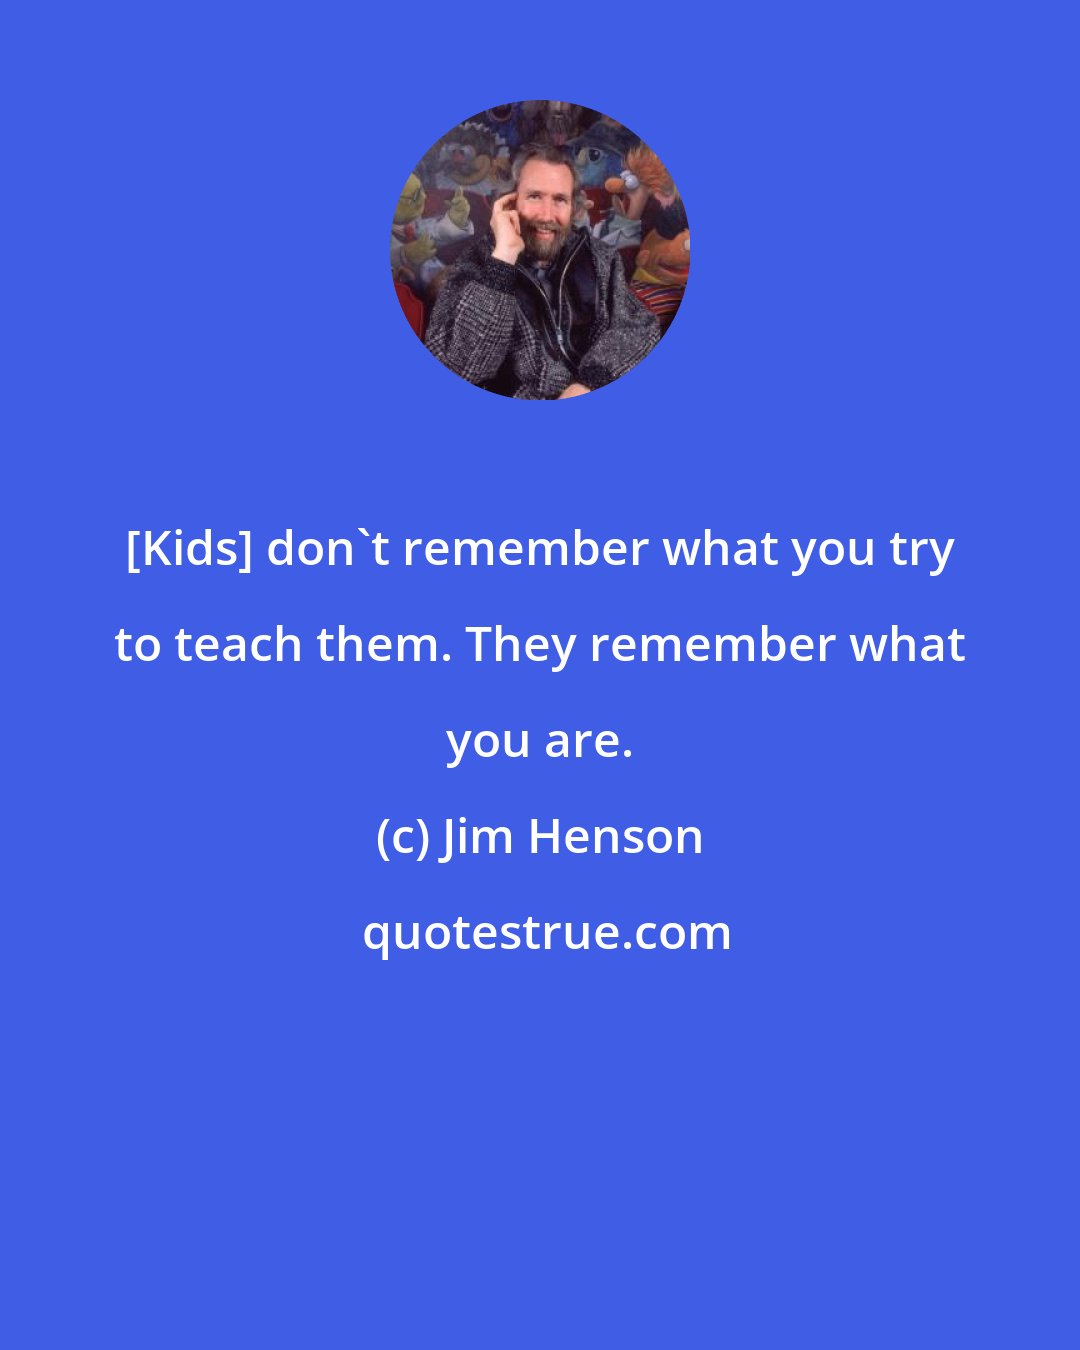 Jim Henson: [Kids] don't remember what you try to teach them. They remember what you are.